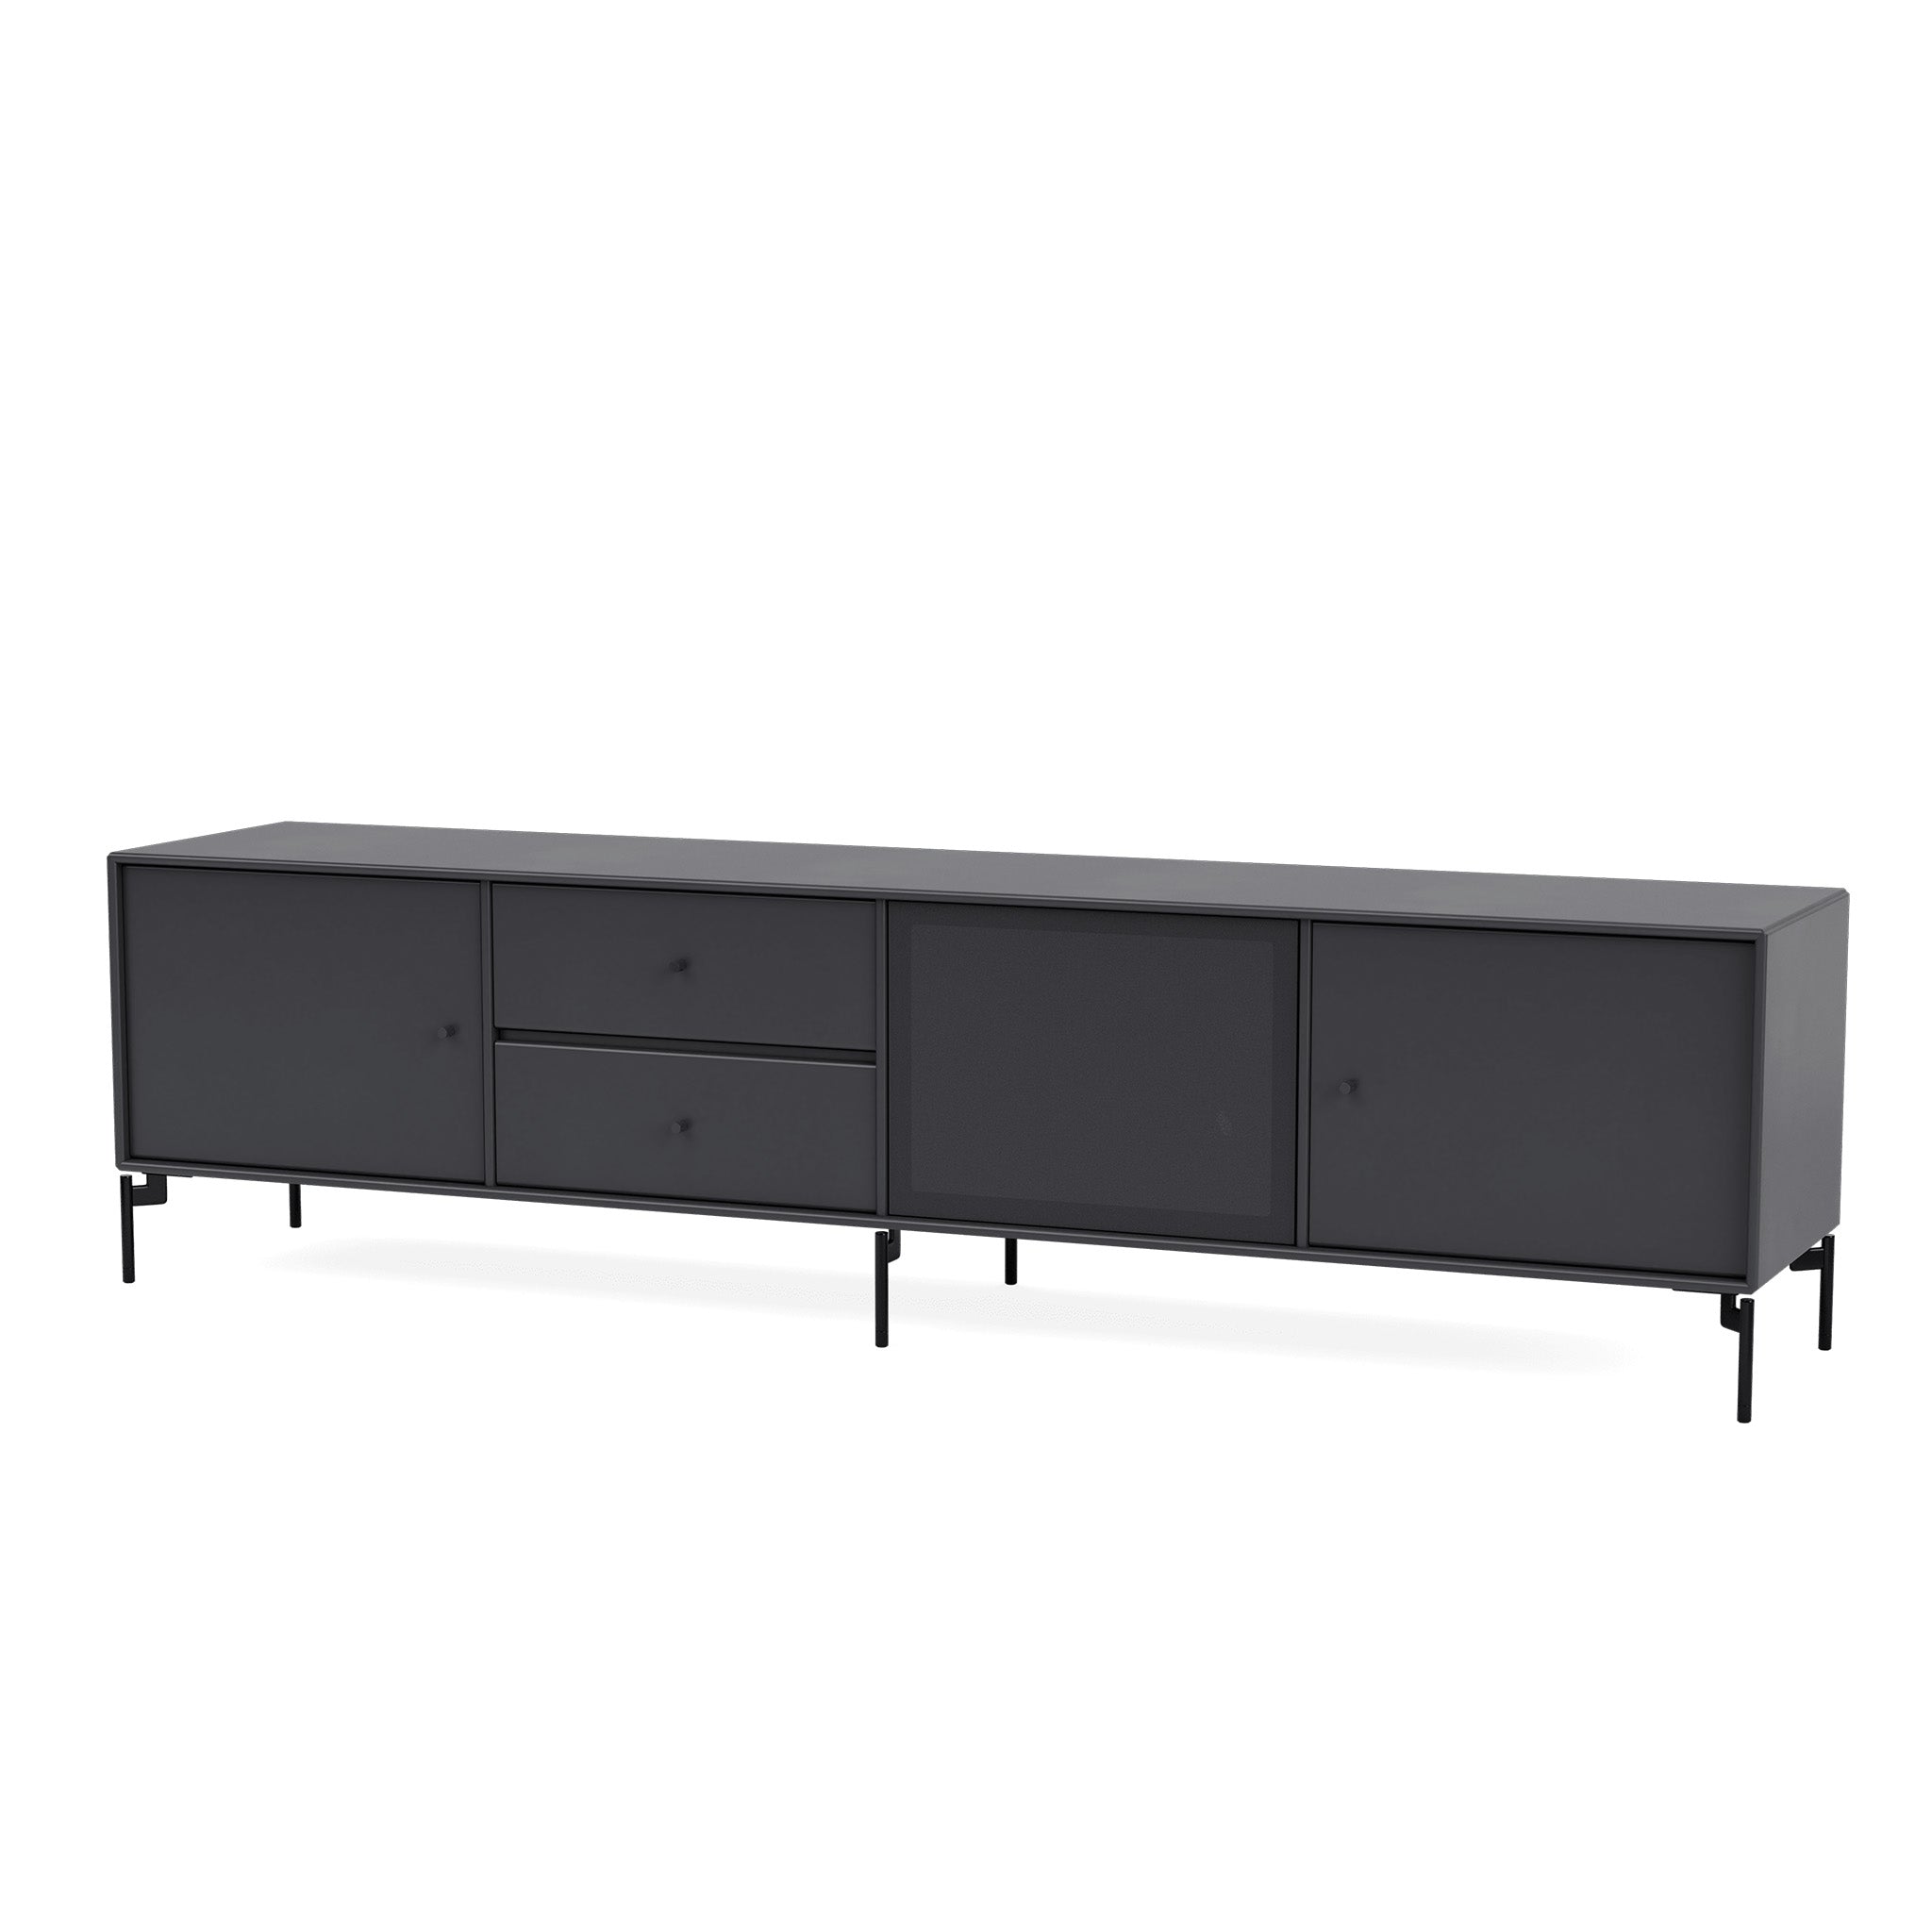 Octave VIII TV Bench by Montana Furniture